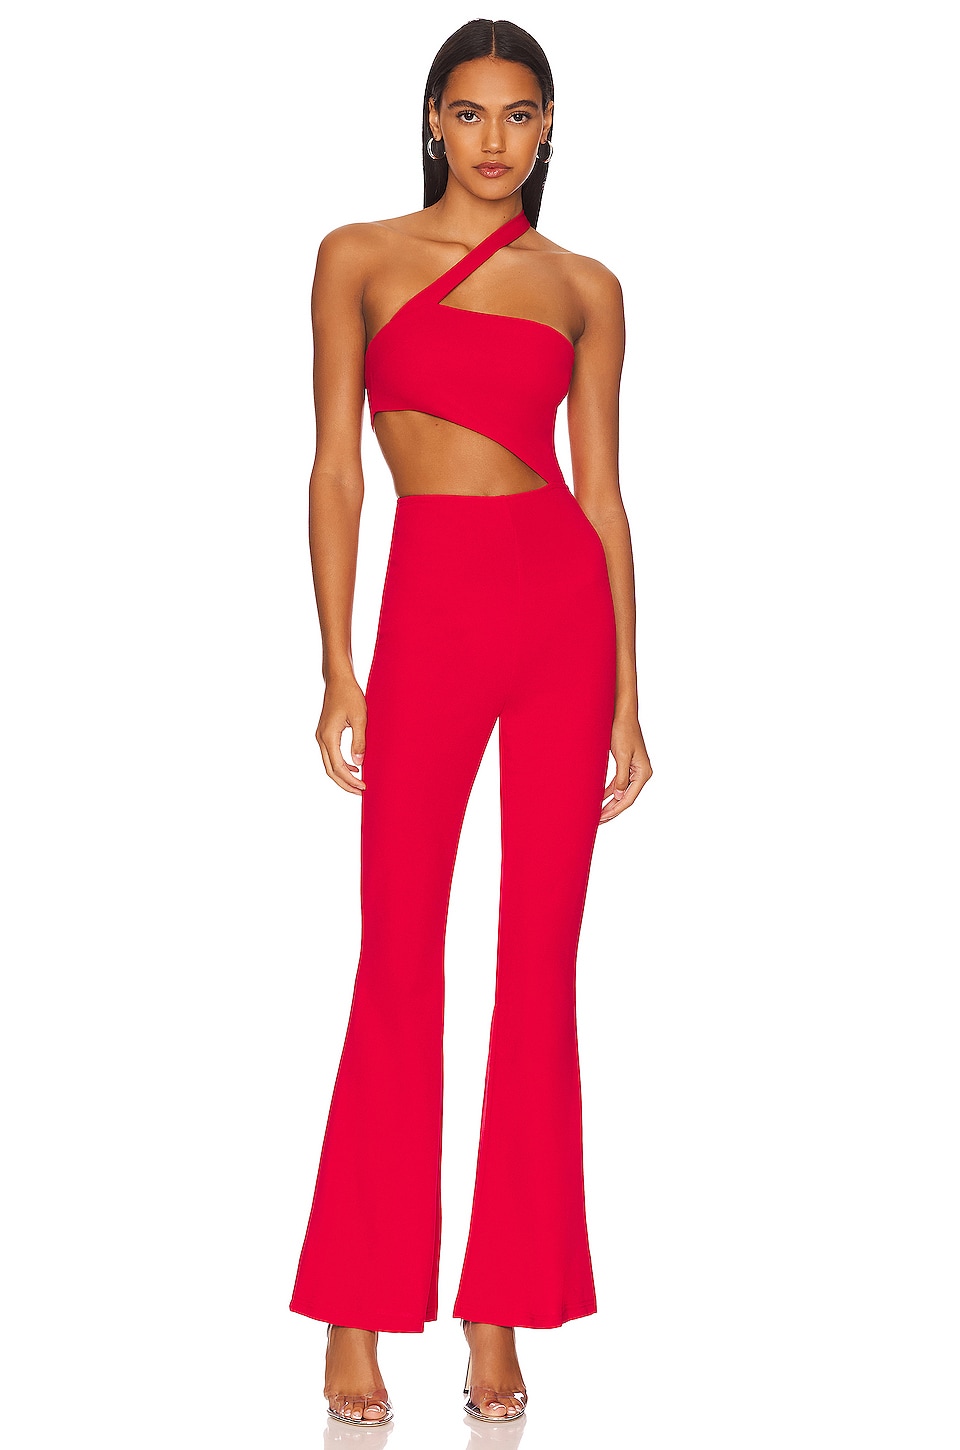 Impressions Major Charisma Denim Jumpsuit in Red S / Red